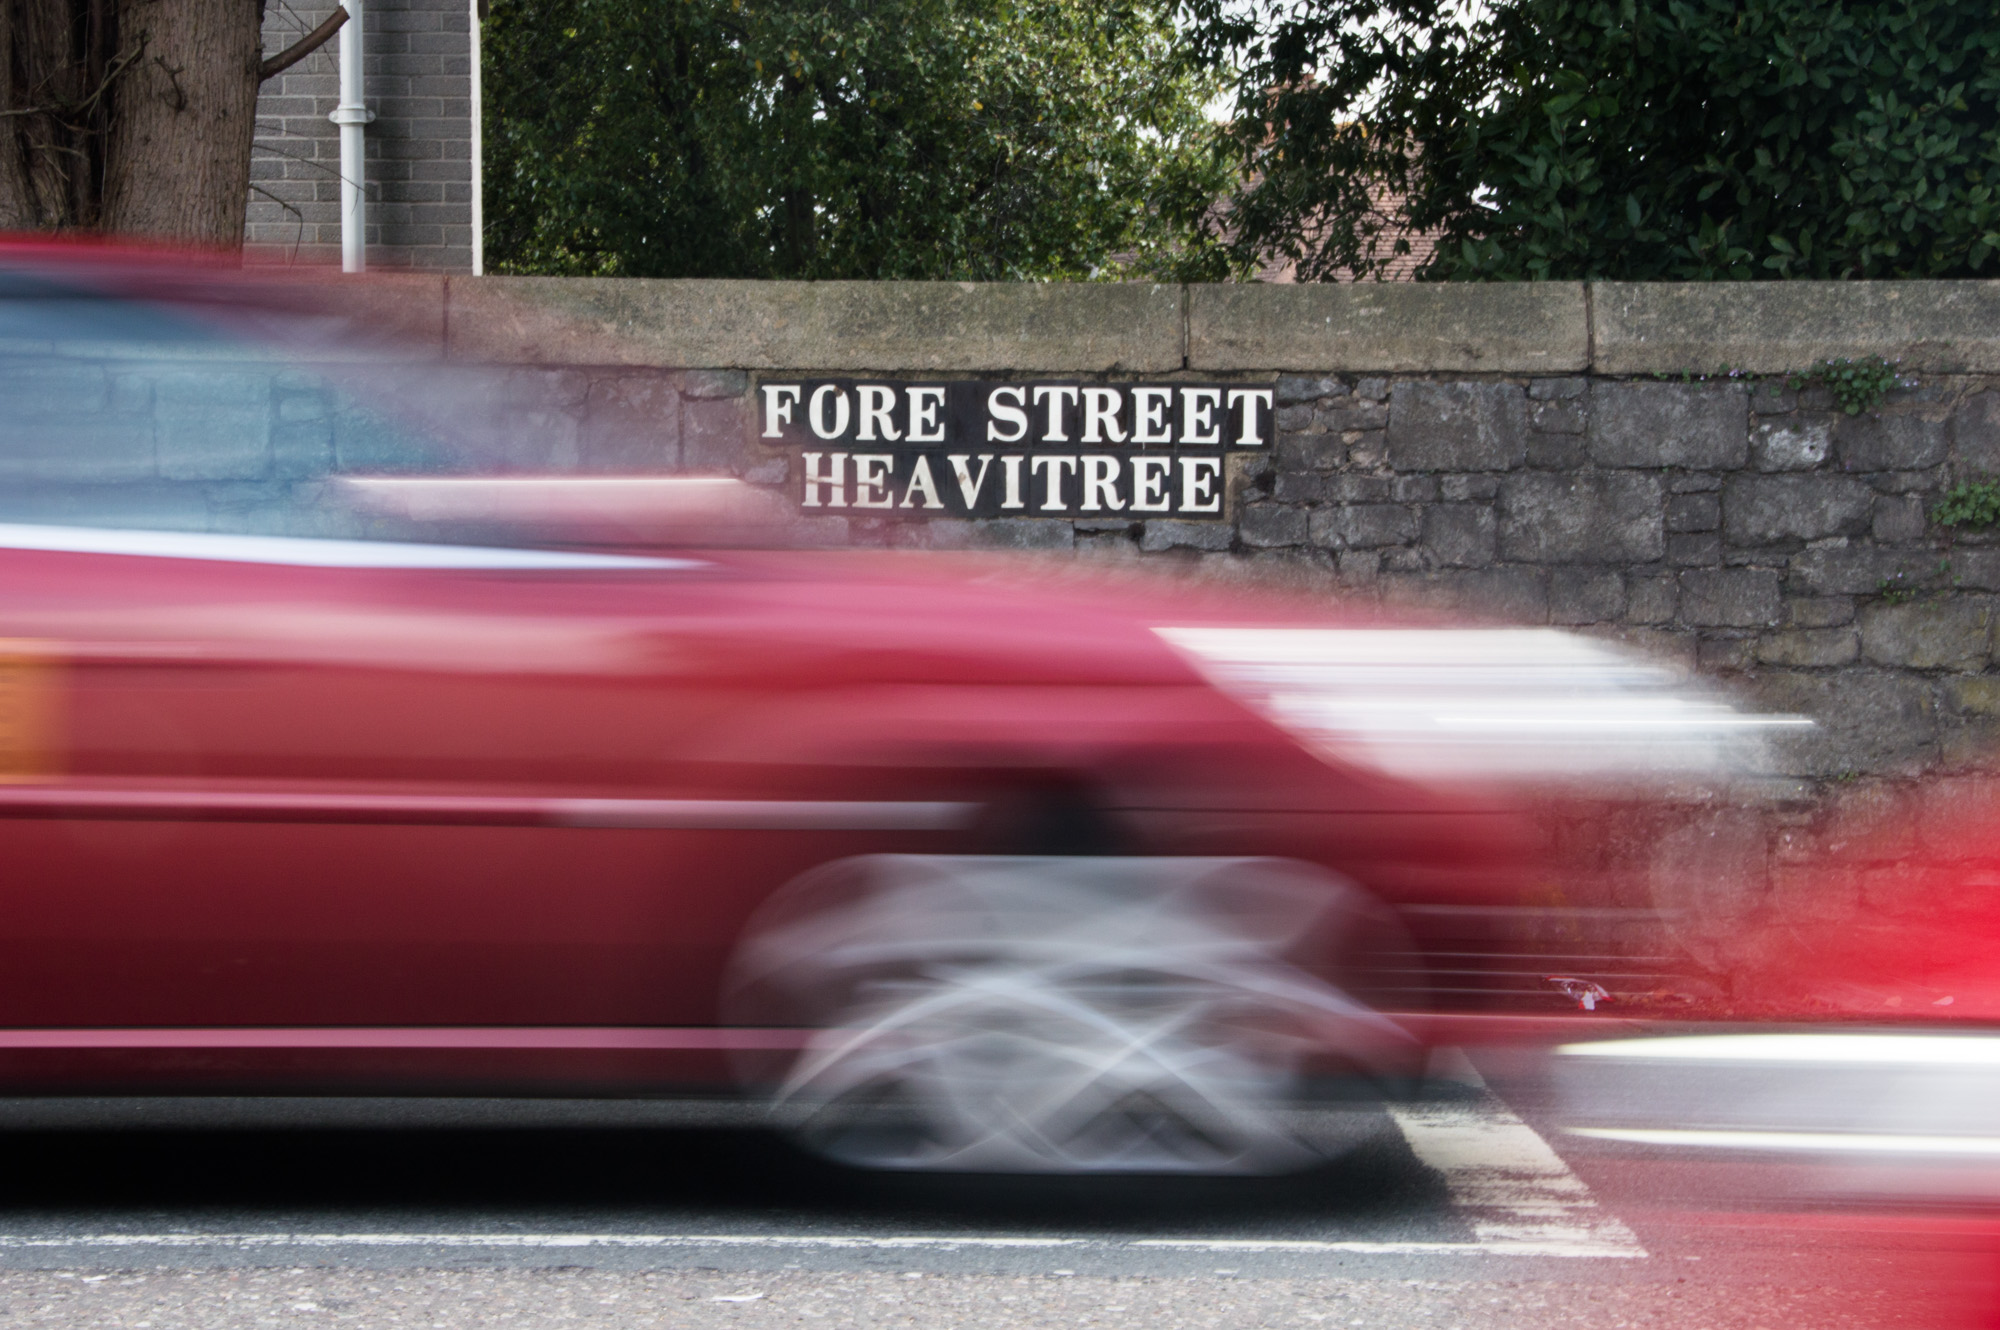 An image of the street name Fore Street Heavitree written in bold white with an image of a red car in motion going past in the foreground